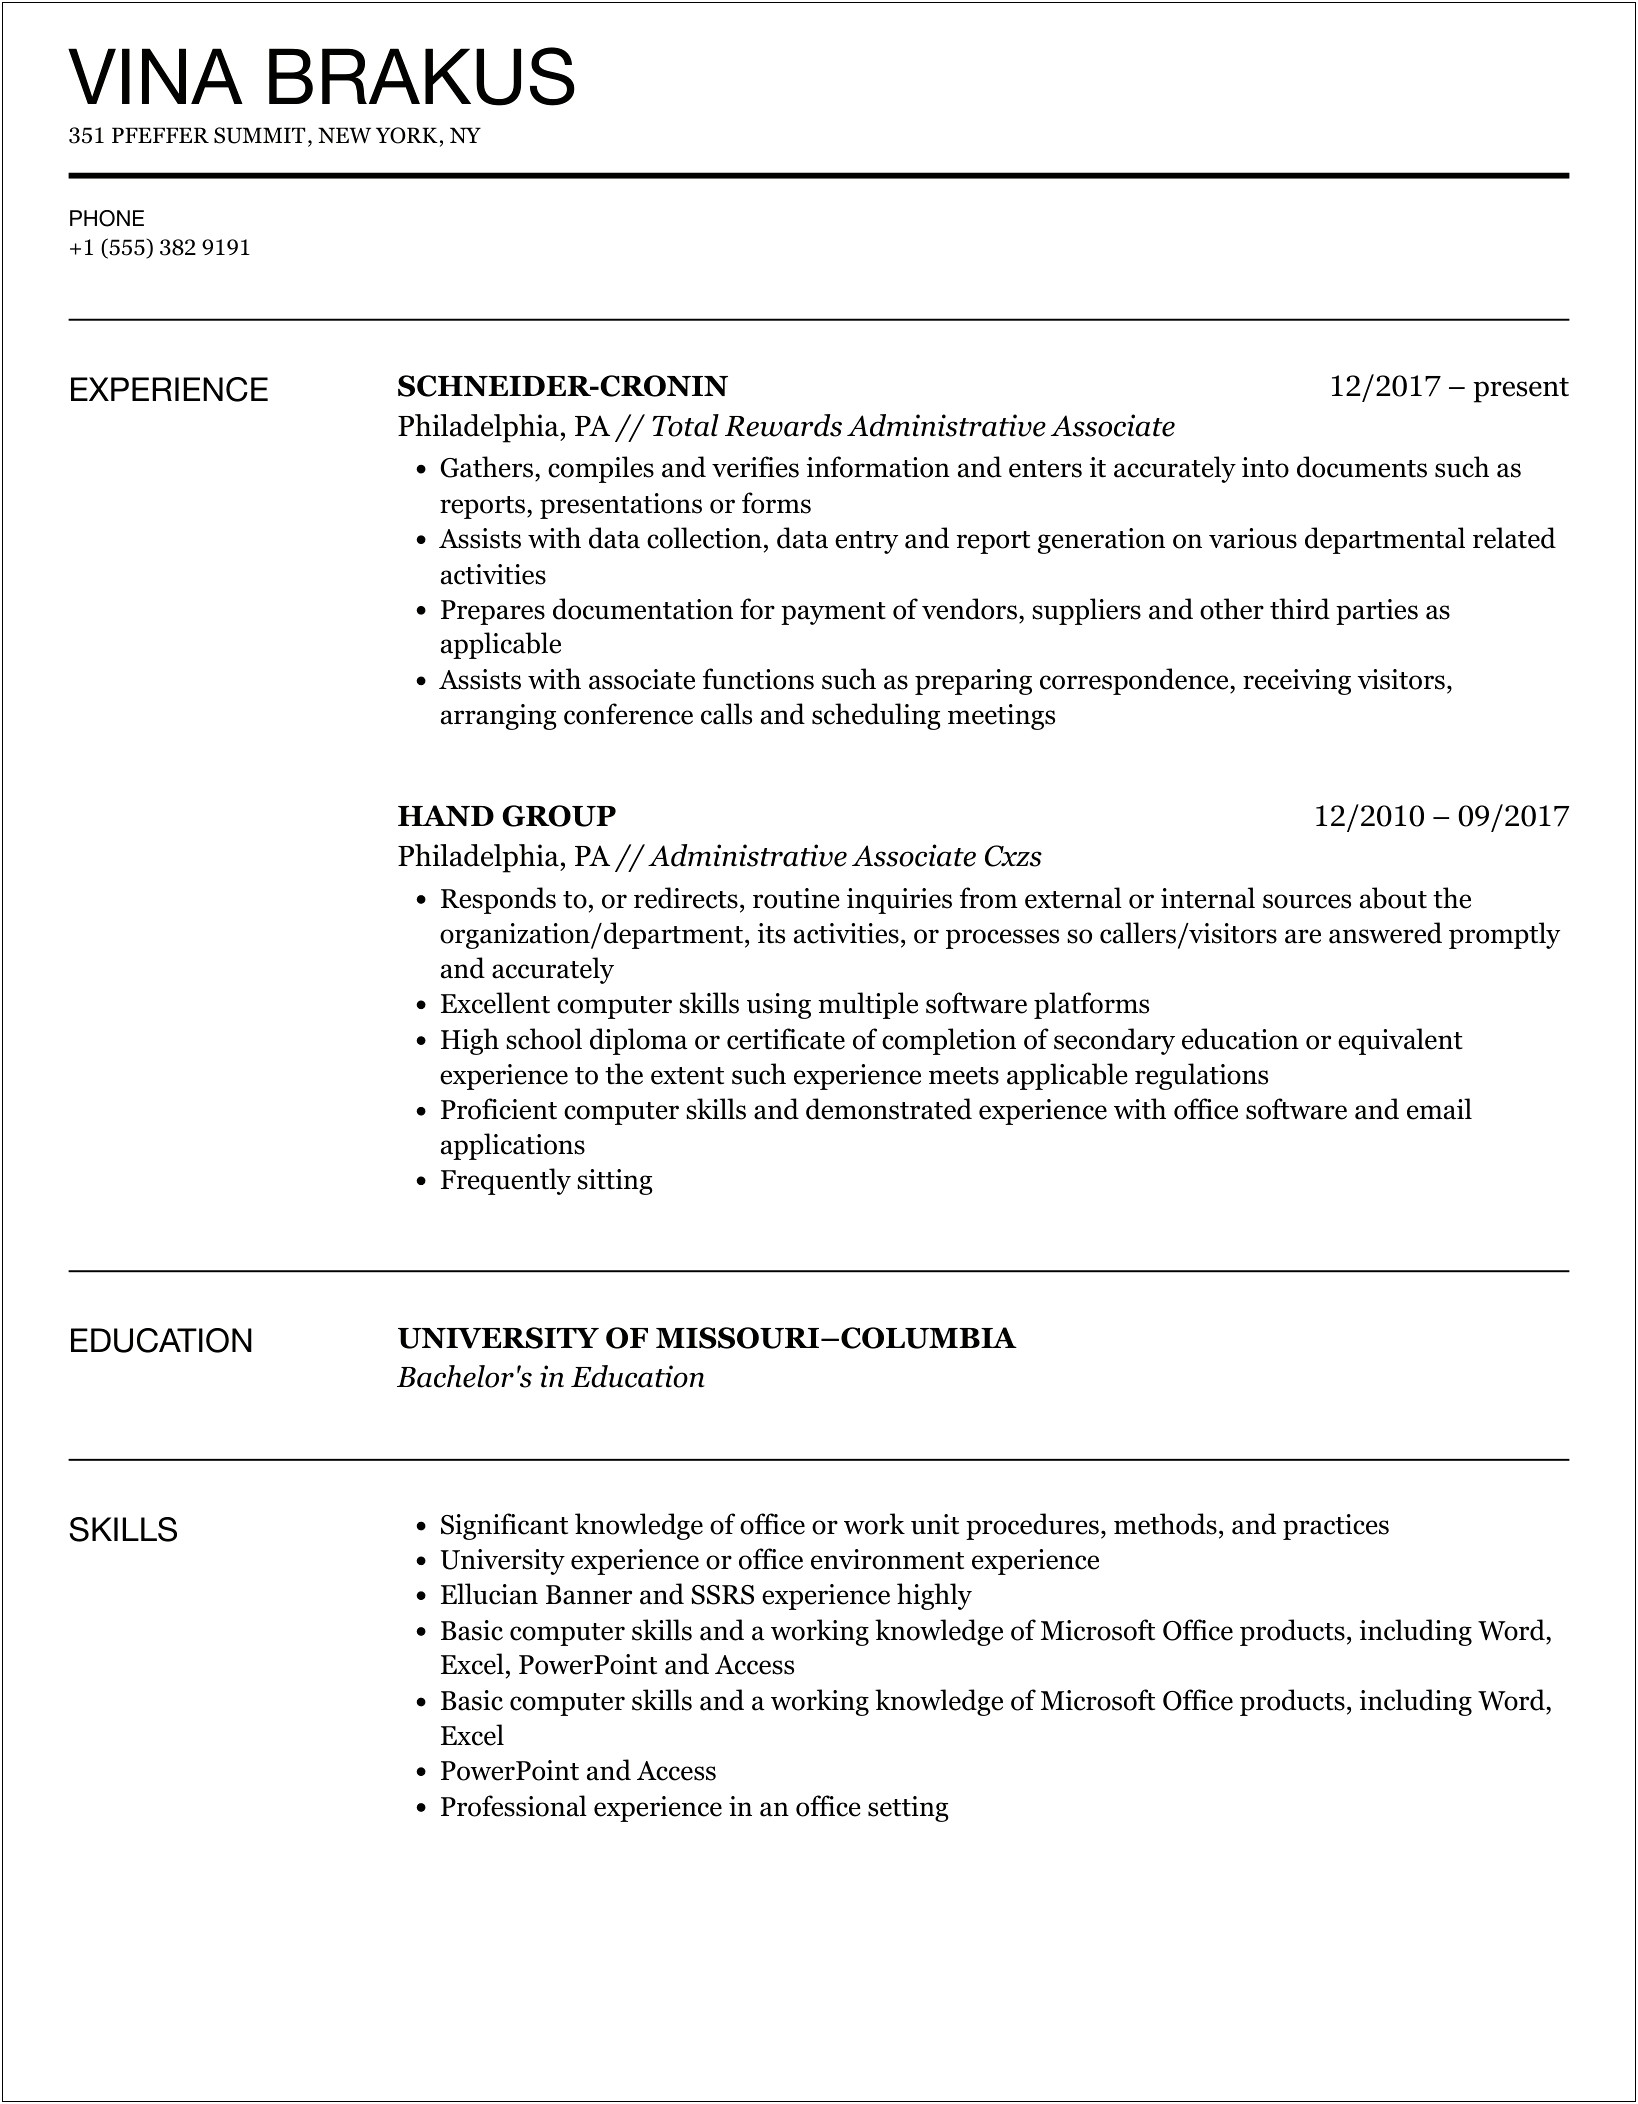 Free Resume Example On Surgery Service Administrative Associate